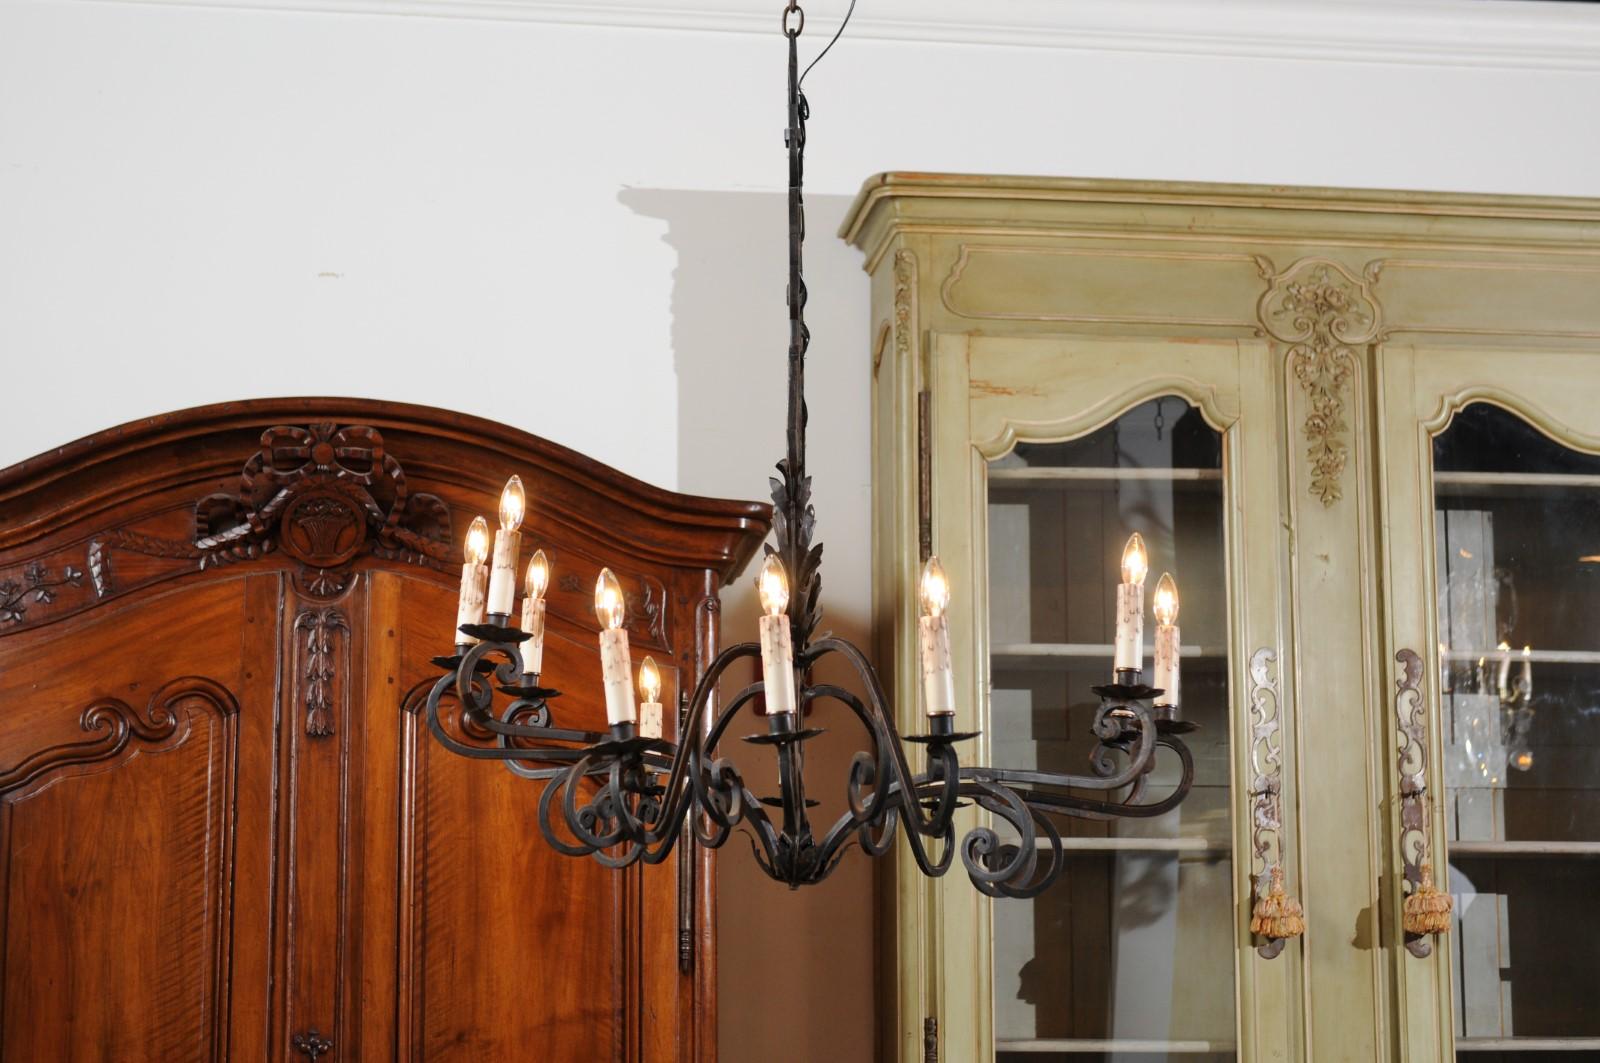 French 12-Light Wrought-Iron Chandelier with Clock Motif and Scrolling Armature For Sale 7